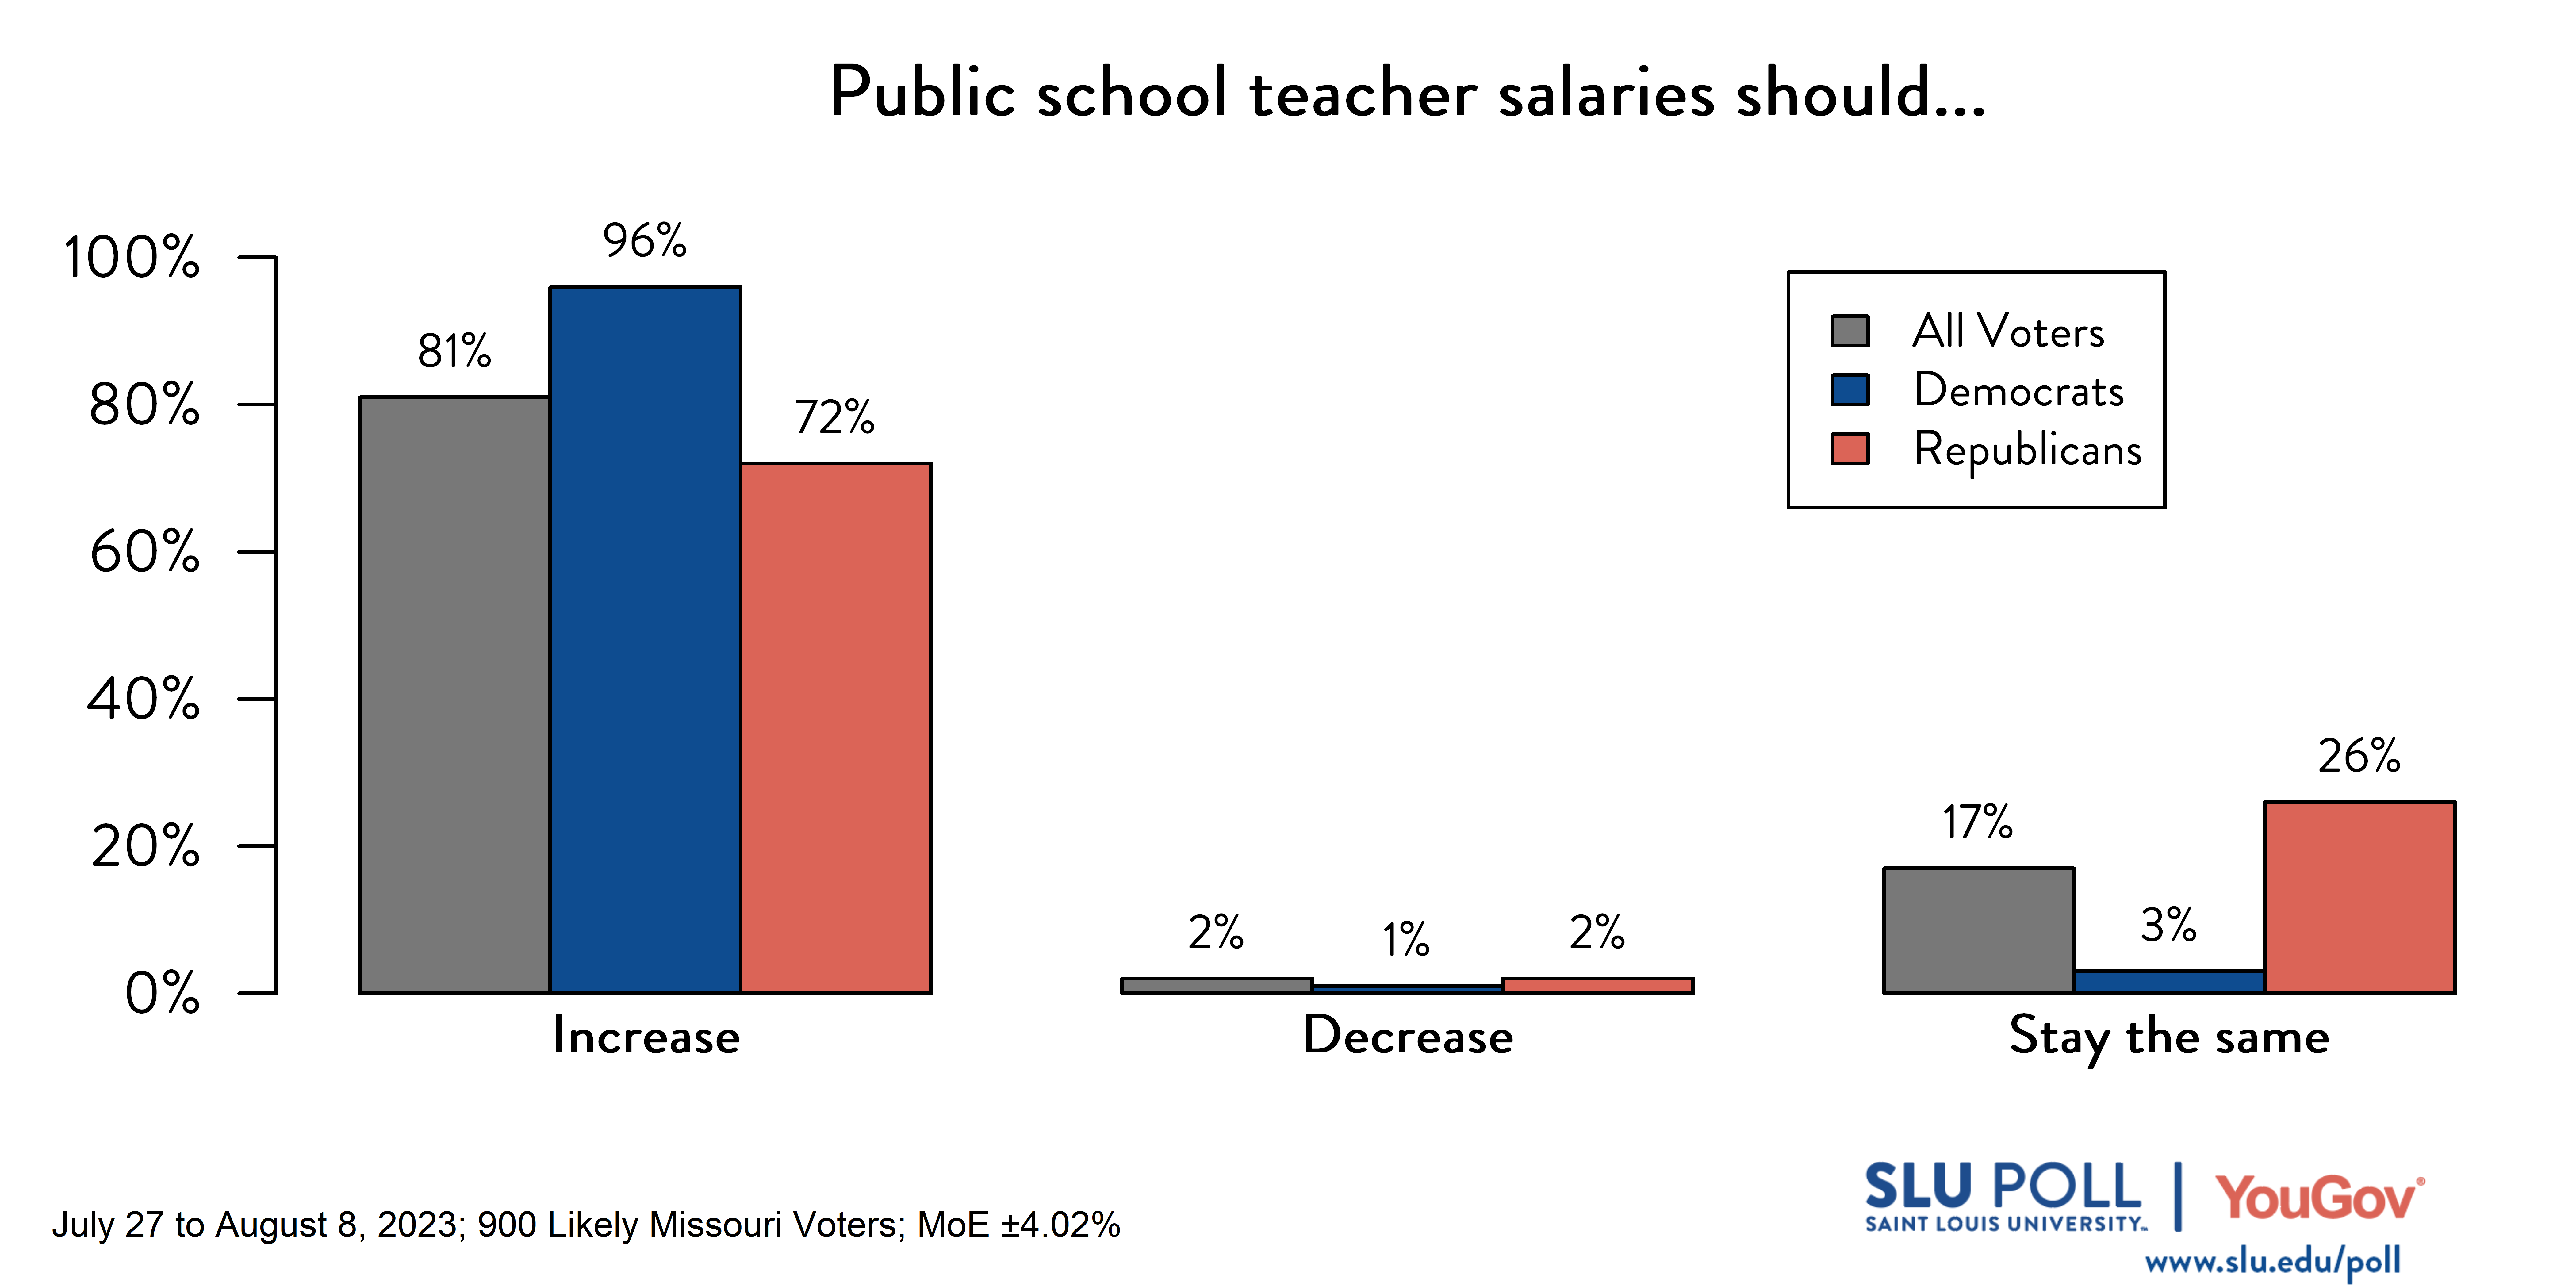 Likely voters' responses to 'Do you think that public school teacher salaries should: ': 81% Increase, 2% Decrease, and 17% Stay the same. Democratic voters' responses: ' 96% Increase, 1% Decrease, and 3% Stay the same. Republican voters' responses: 72% Increase, 2% Decrease, and 26% Stay the same.